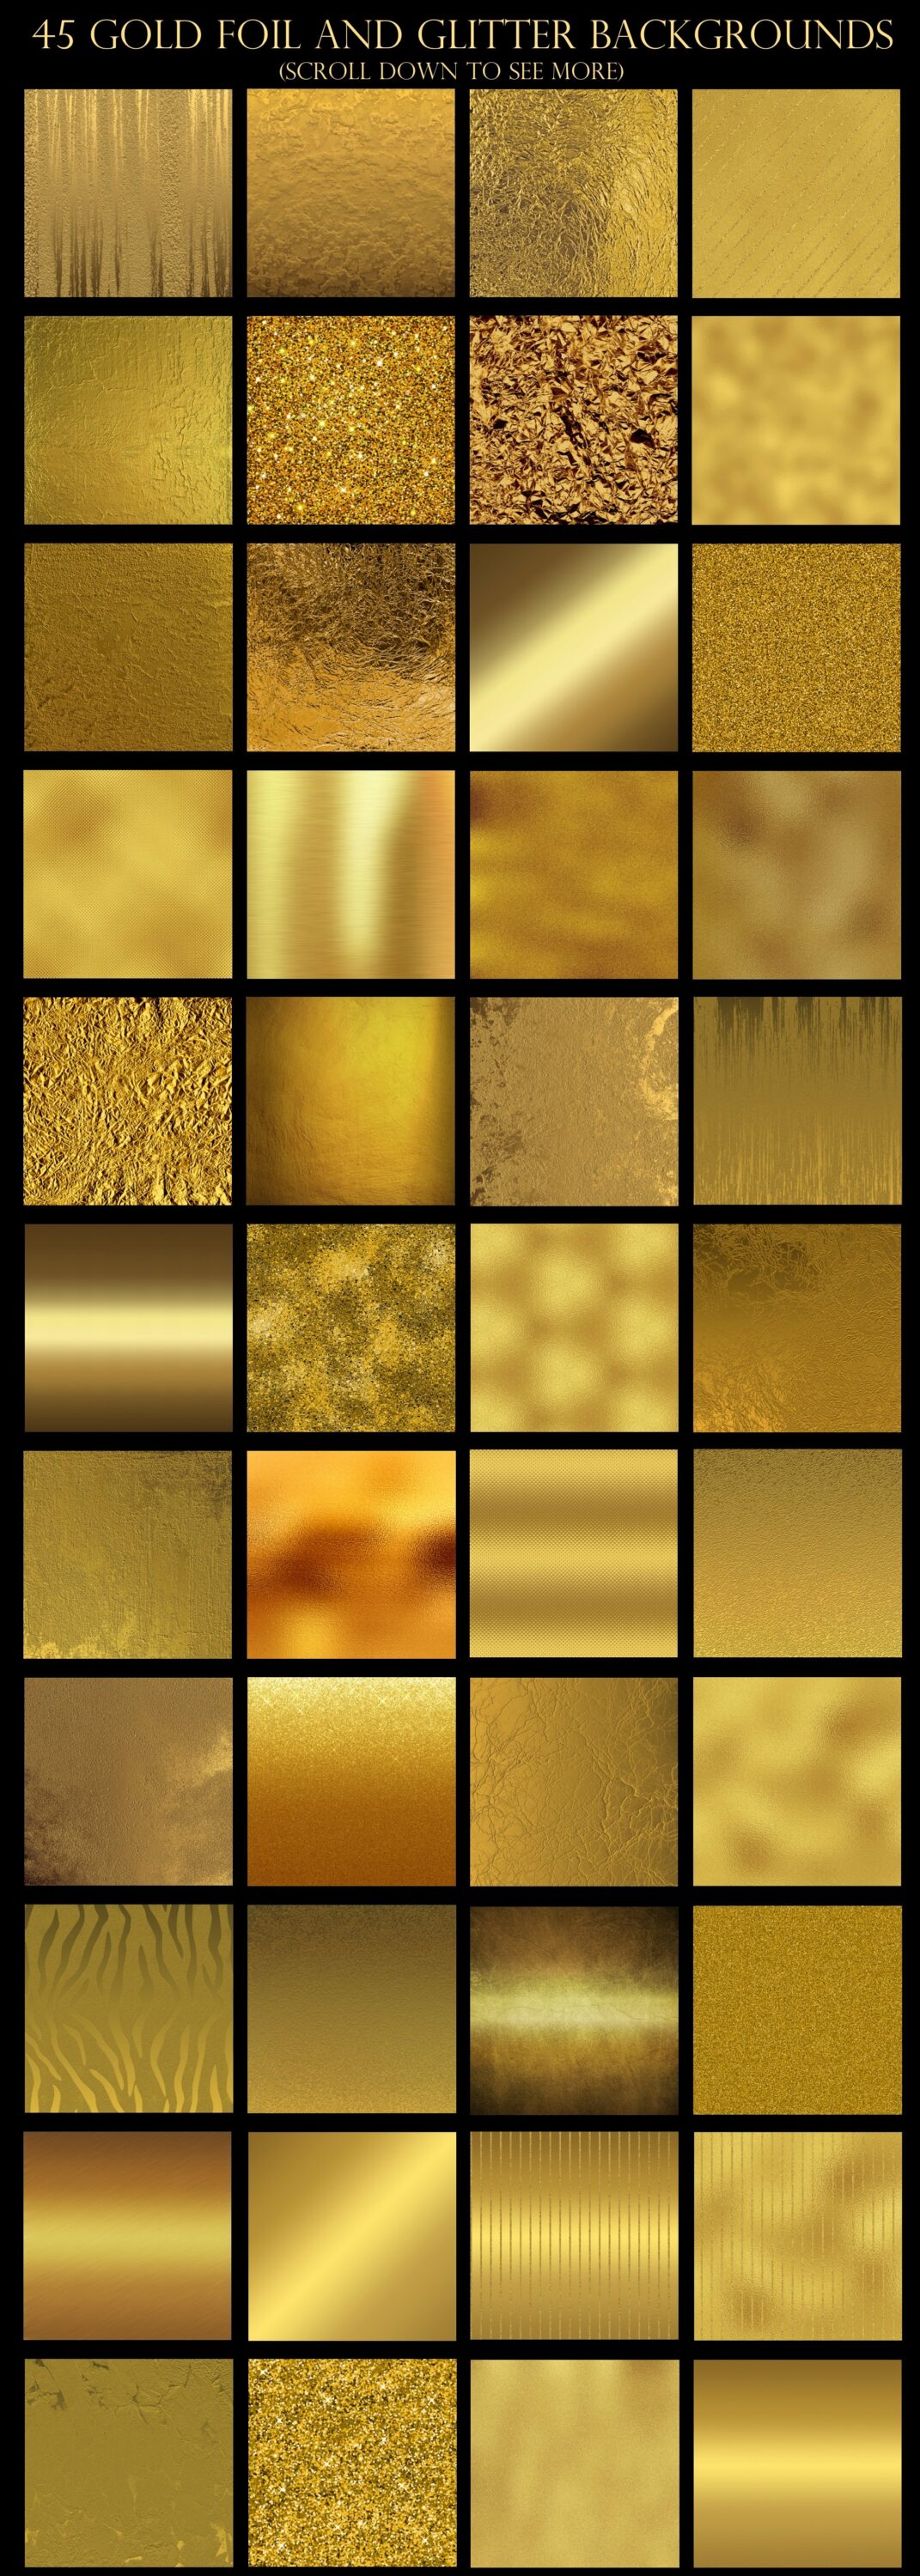 Collection of gold foil and glitter backgrounds.